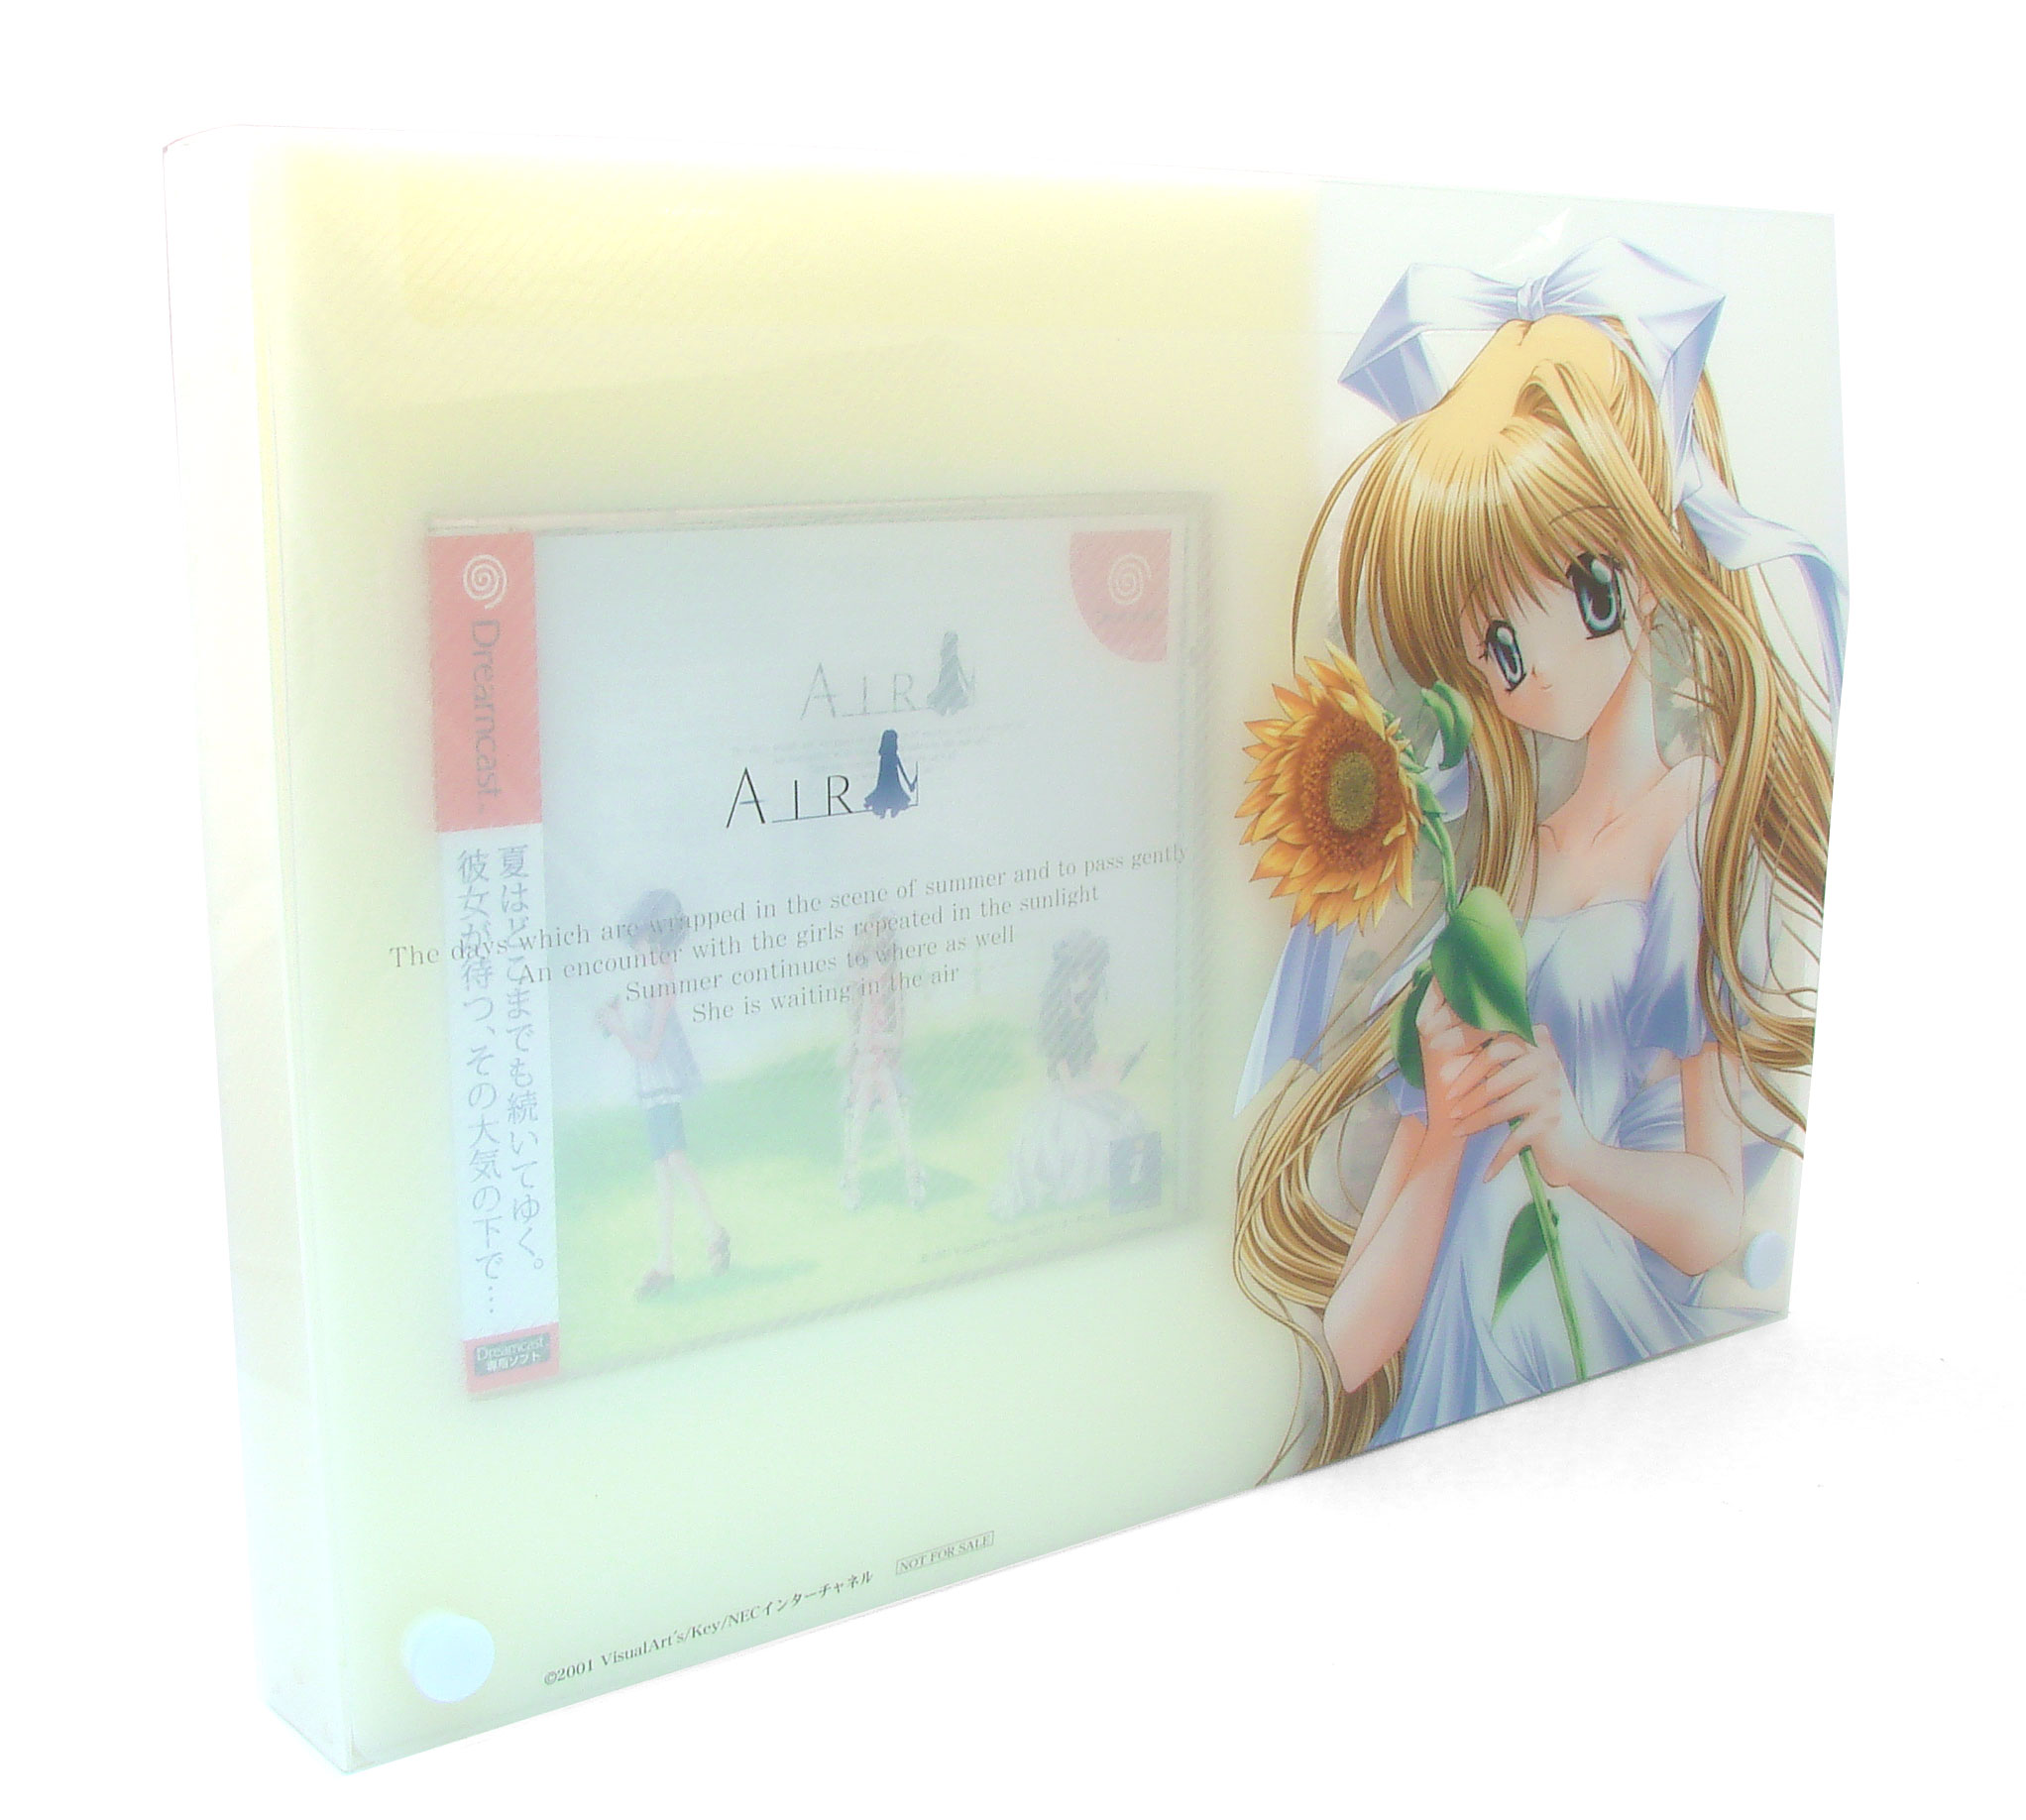 Air [Limited Edition] for Dreamcast